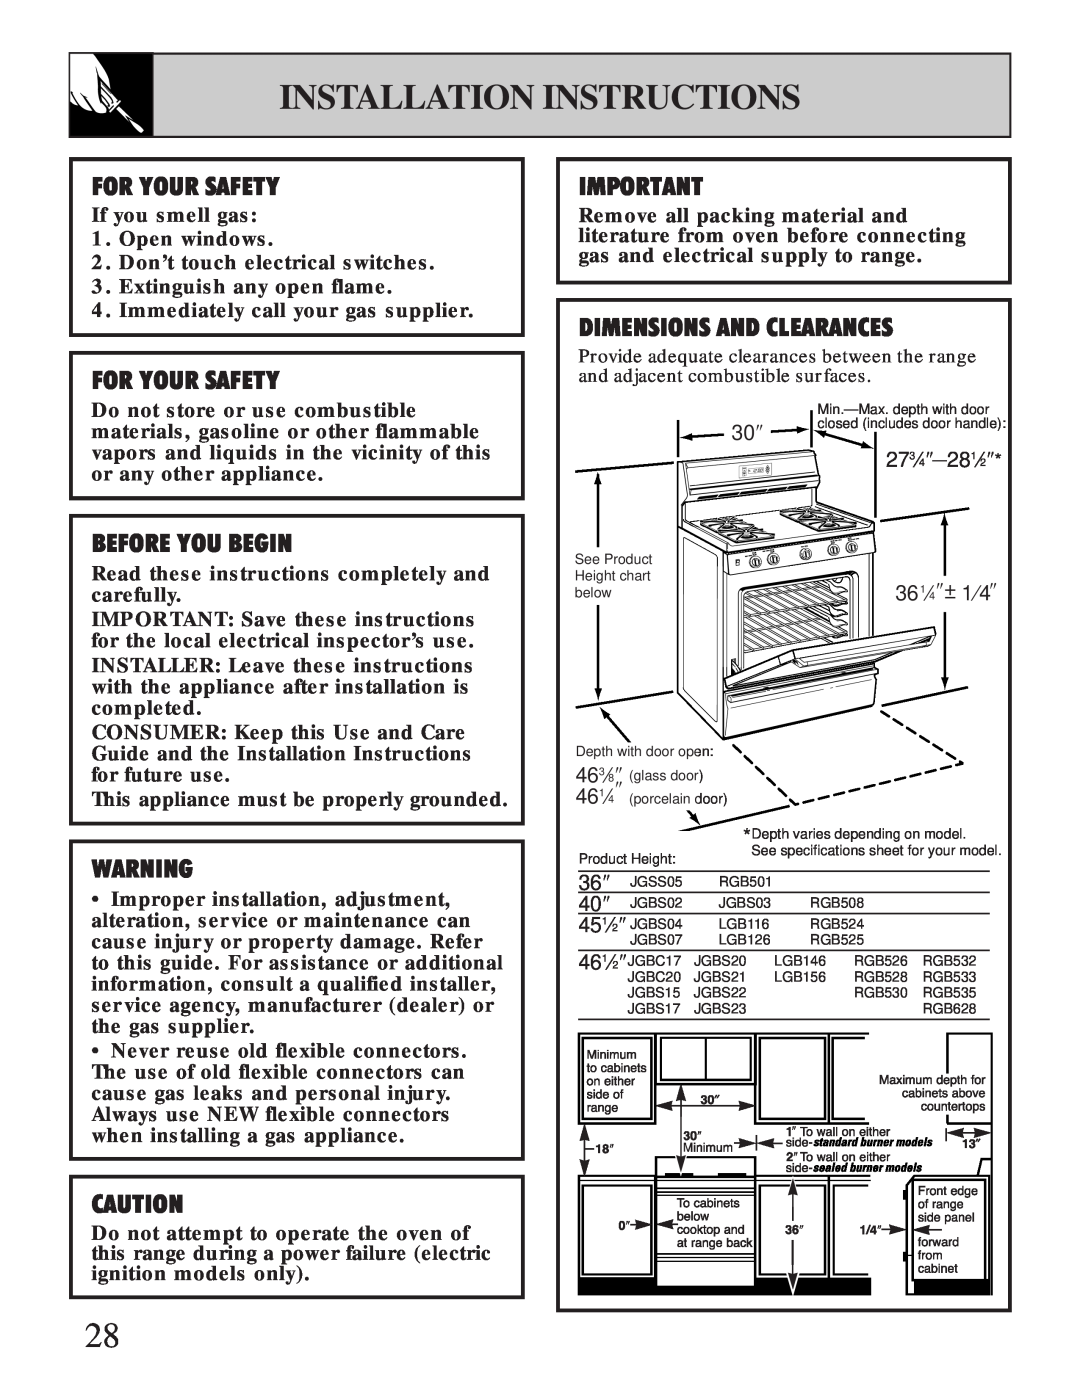 GE XL44TM installation instructions Installation Instructions, For Your Safety, Before You Begin, Dimensions And Clearances 